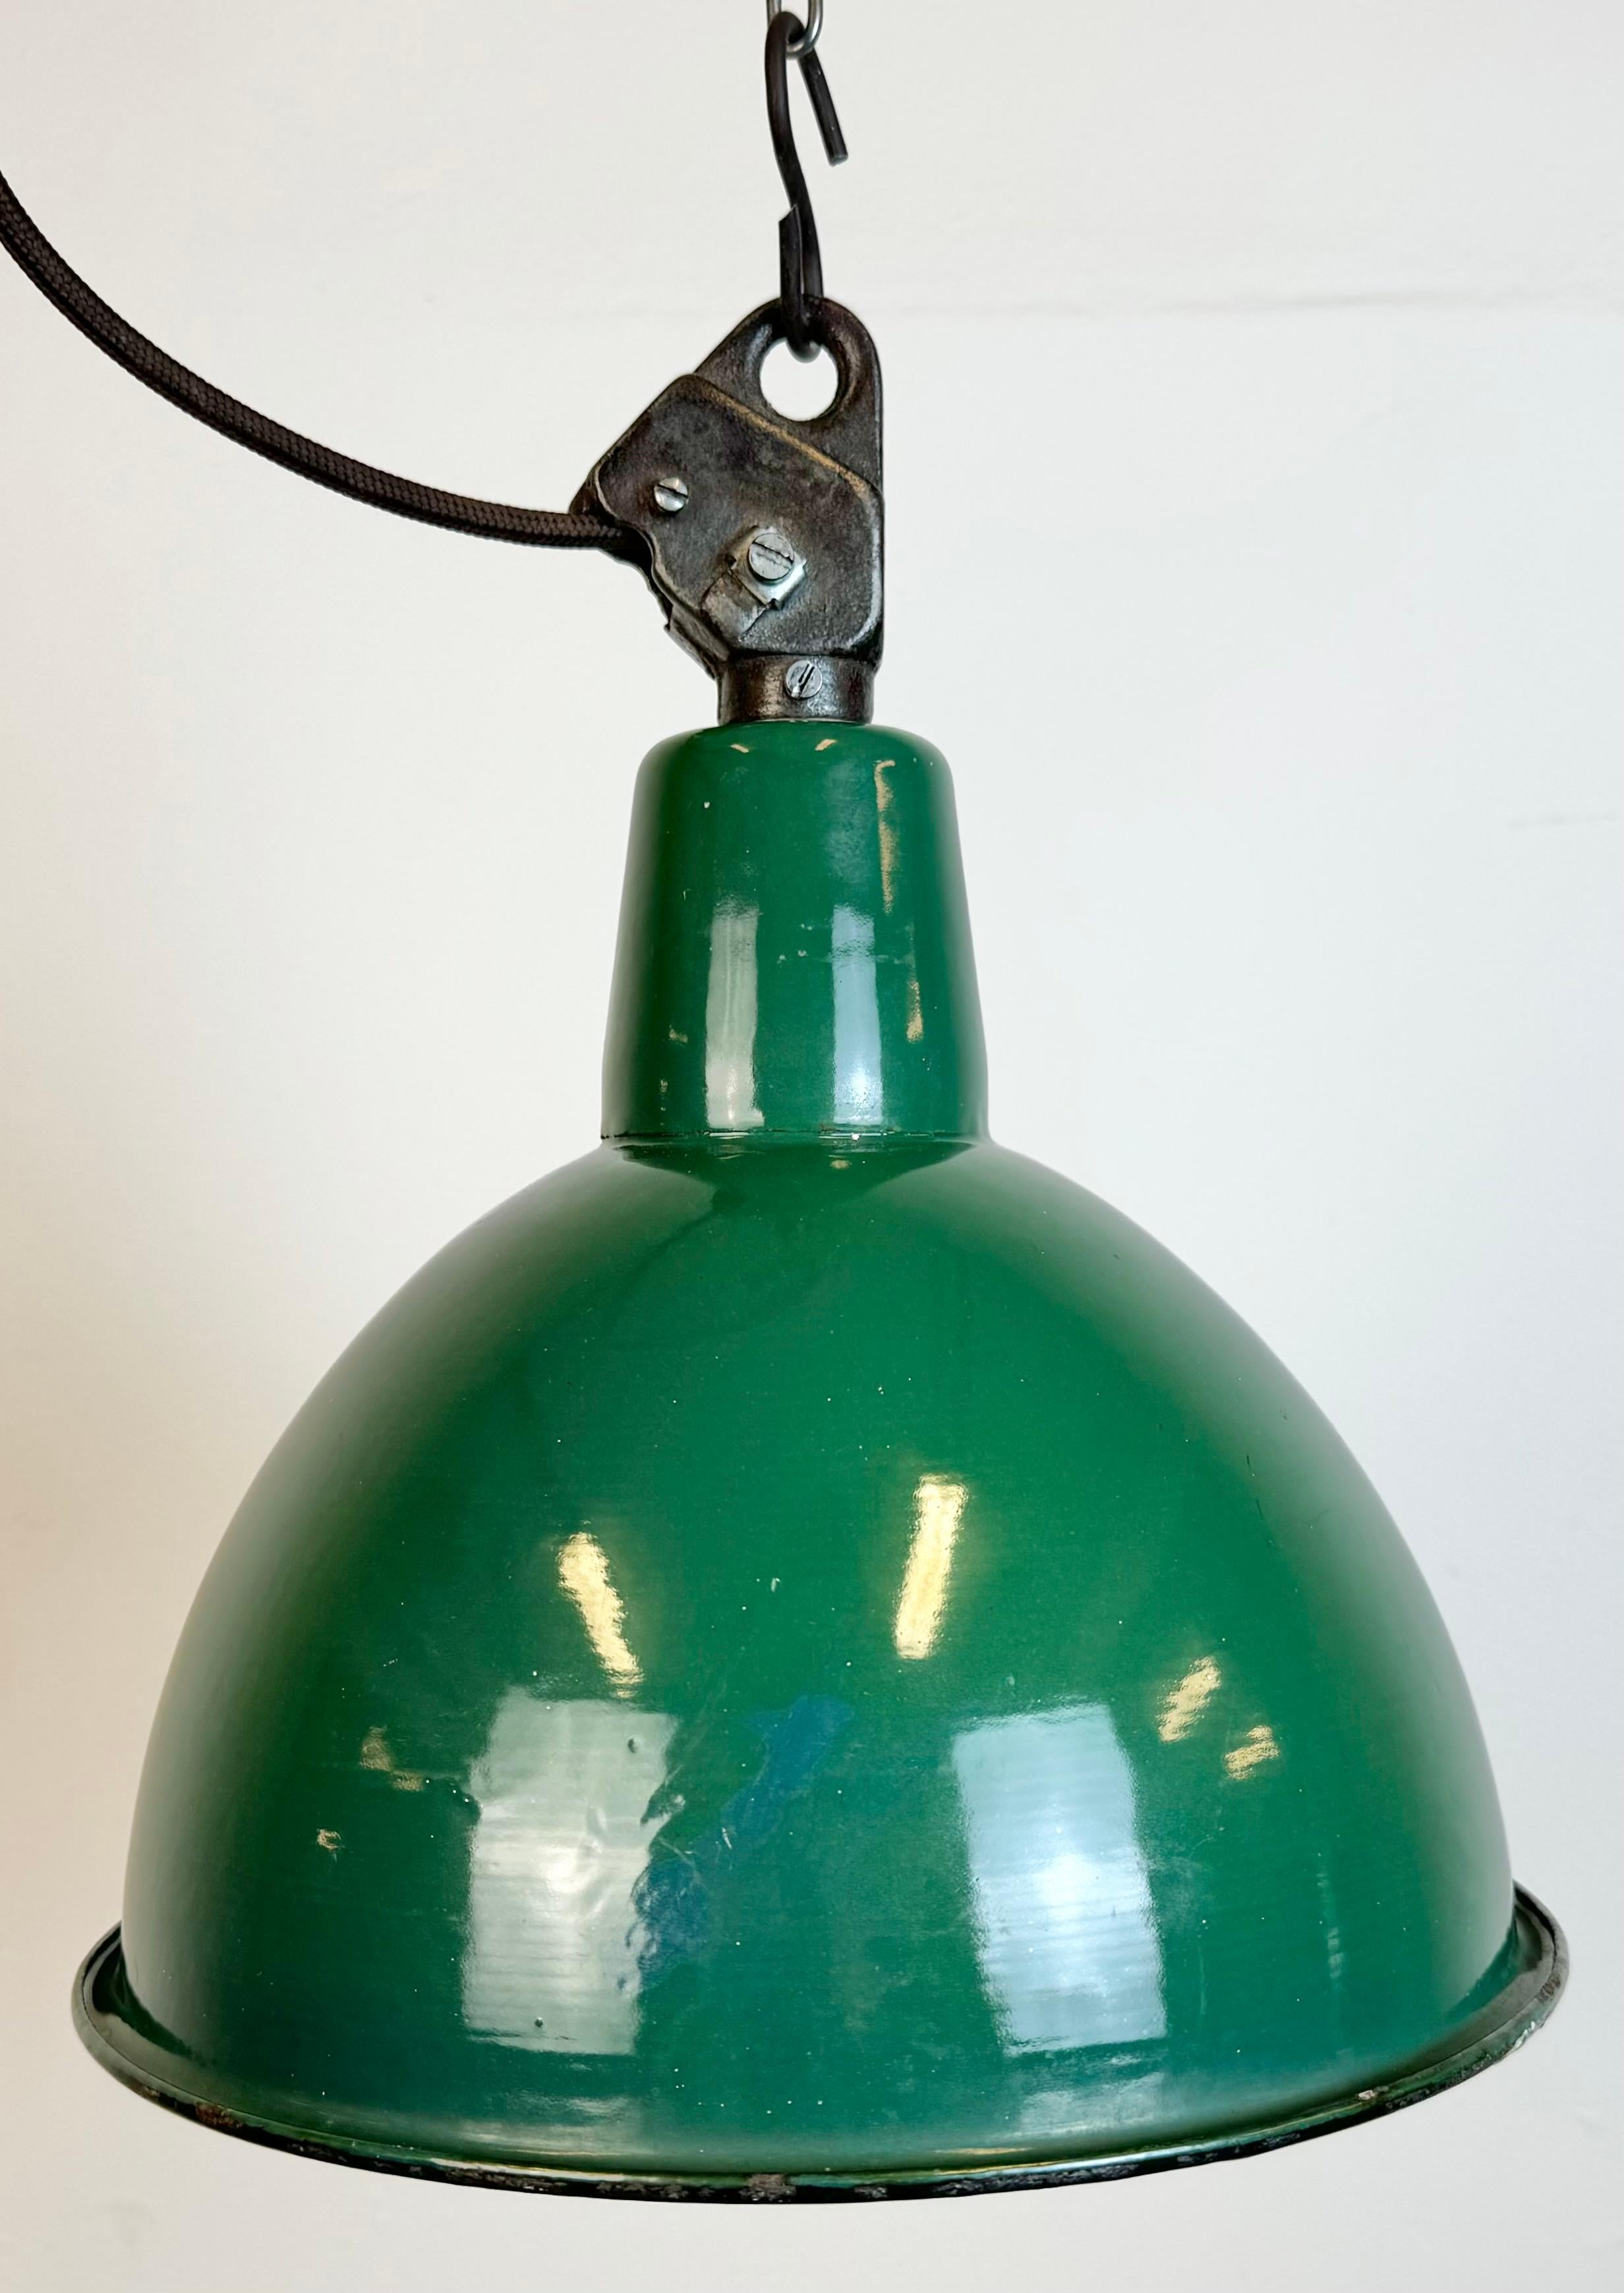 Polish Industrial Green Enamel Factory Lamp with Cast Iron Top, 1960s For Sale